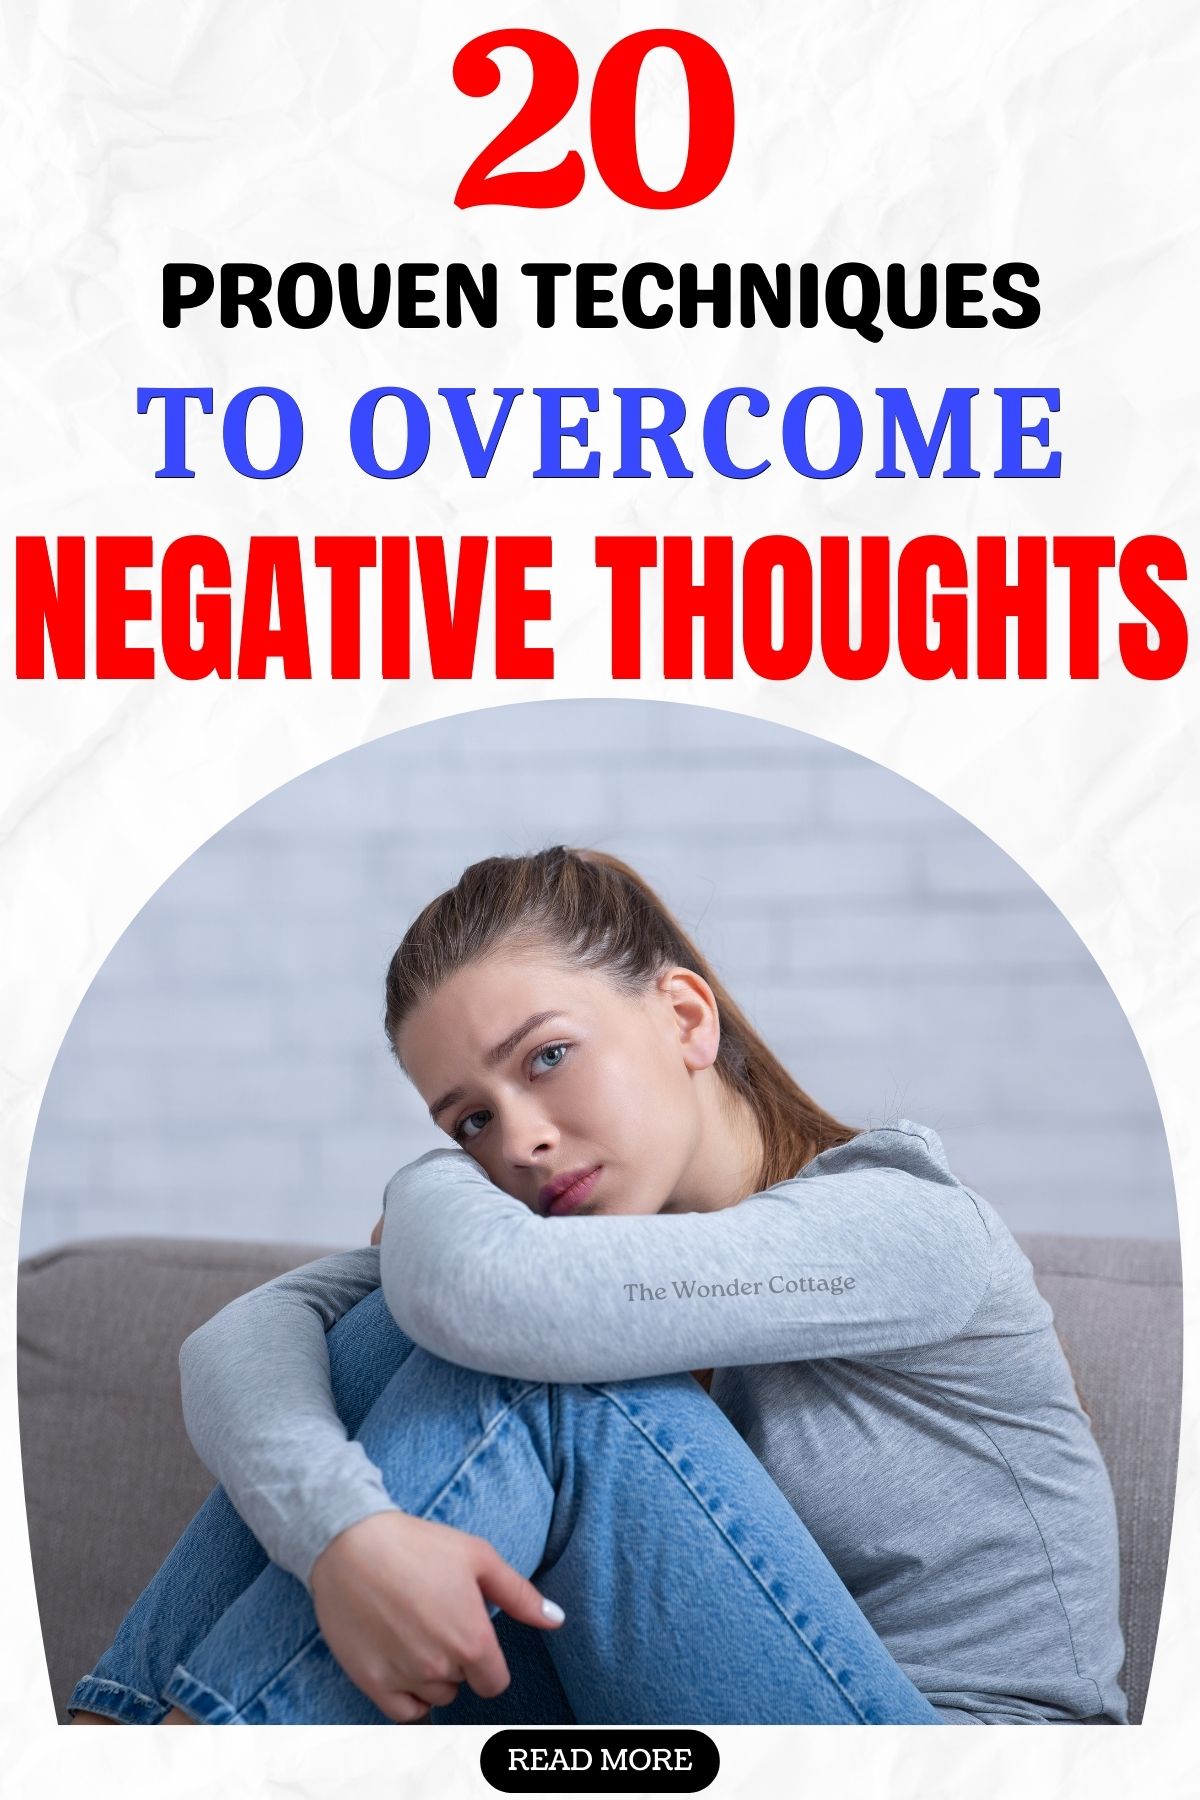 20 Proven Techniques To Overcome Negative Thoughts